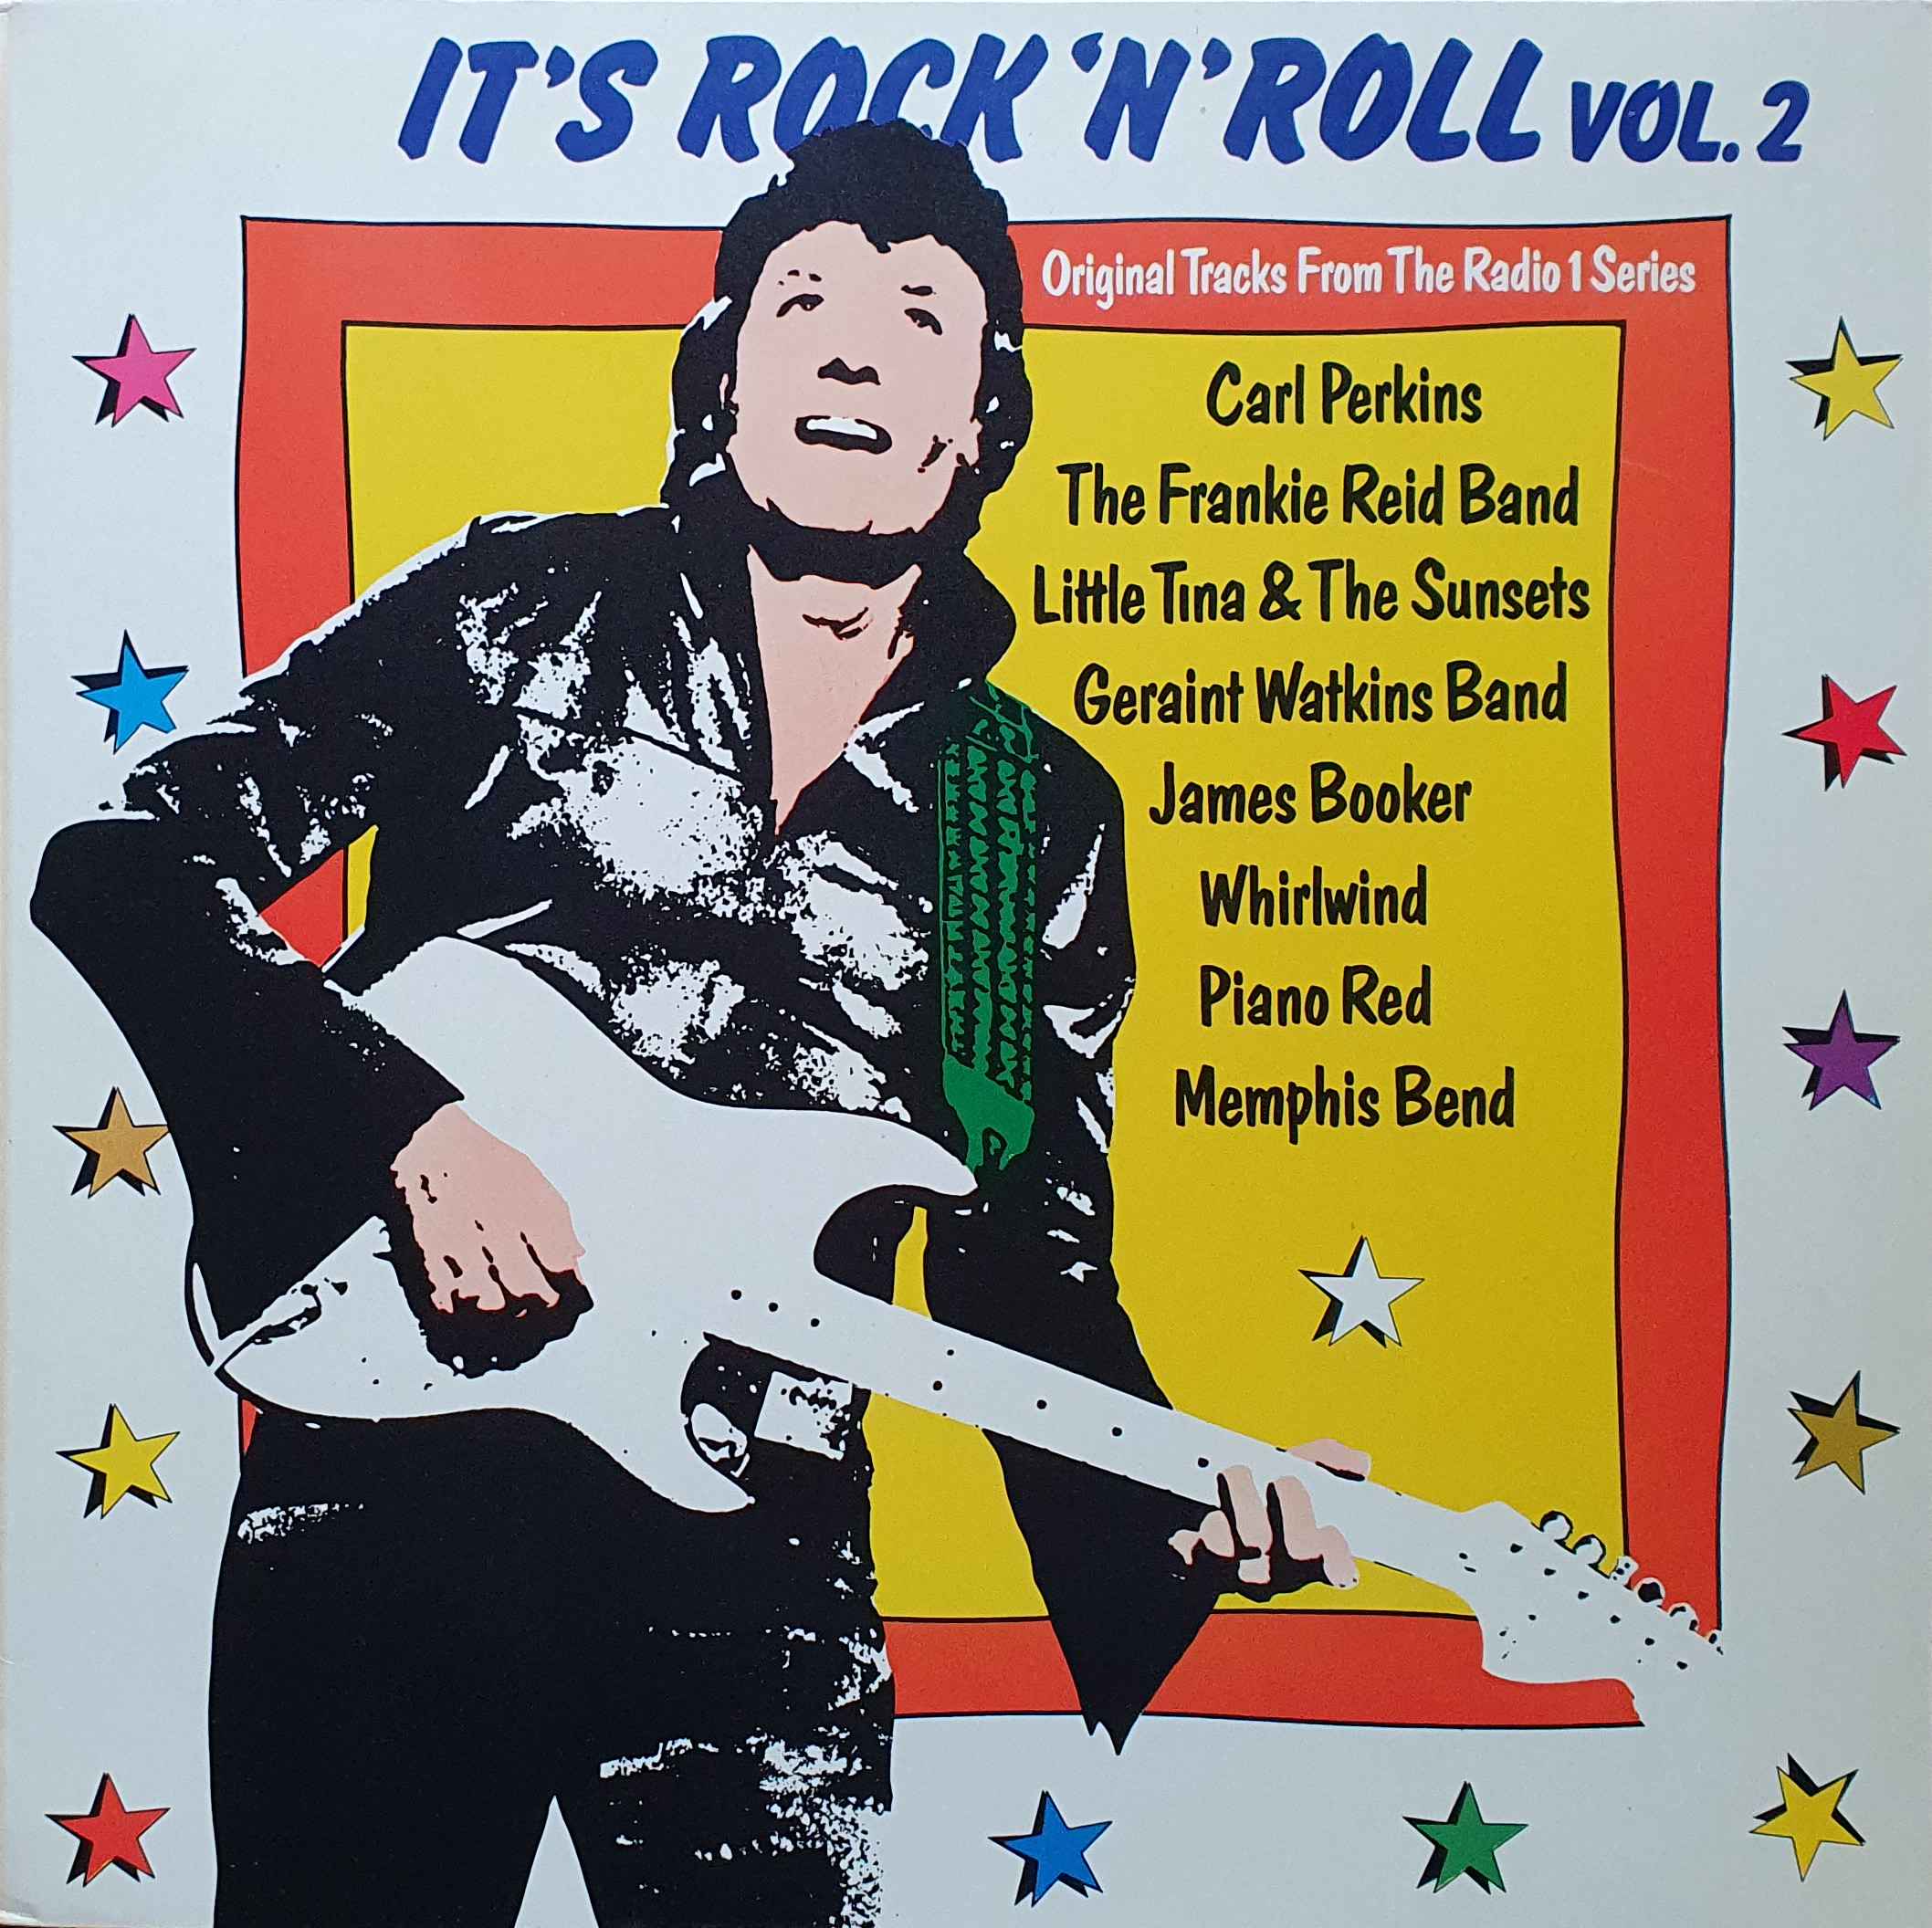 Picture of It's rock 'N' roll - Volume 2 by artist Various from the BBC albums - Records and Tapes library